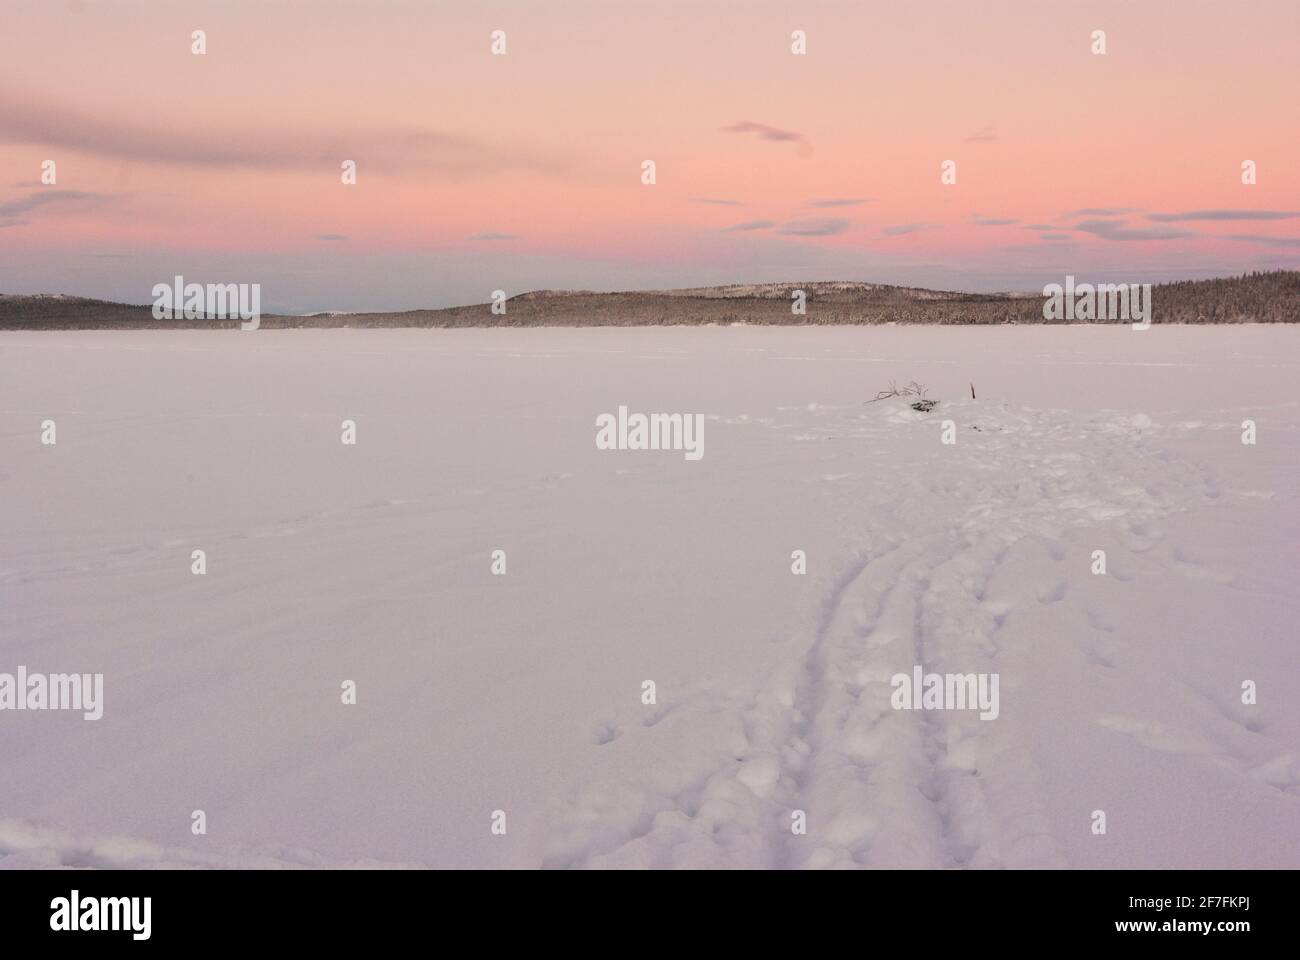 The frozen surface of the Torne River, near Jukkasjärvi, Kiruna, Sweden, Arctic Circle, with a pink winter sky and snowmobile tracks. Stock Photo